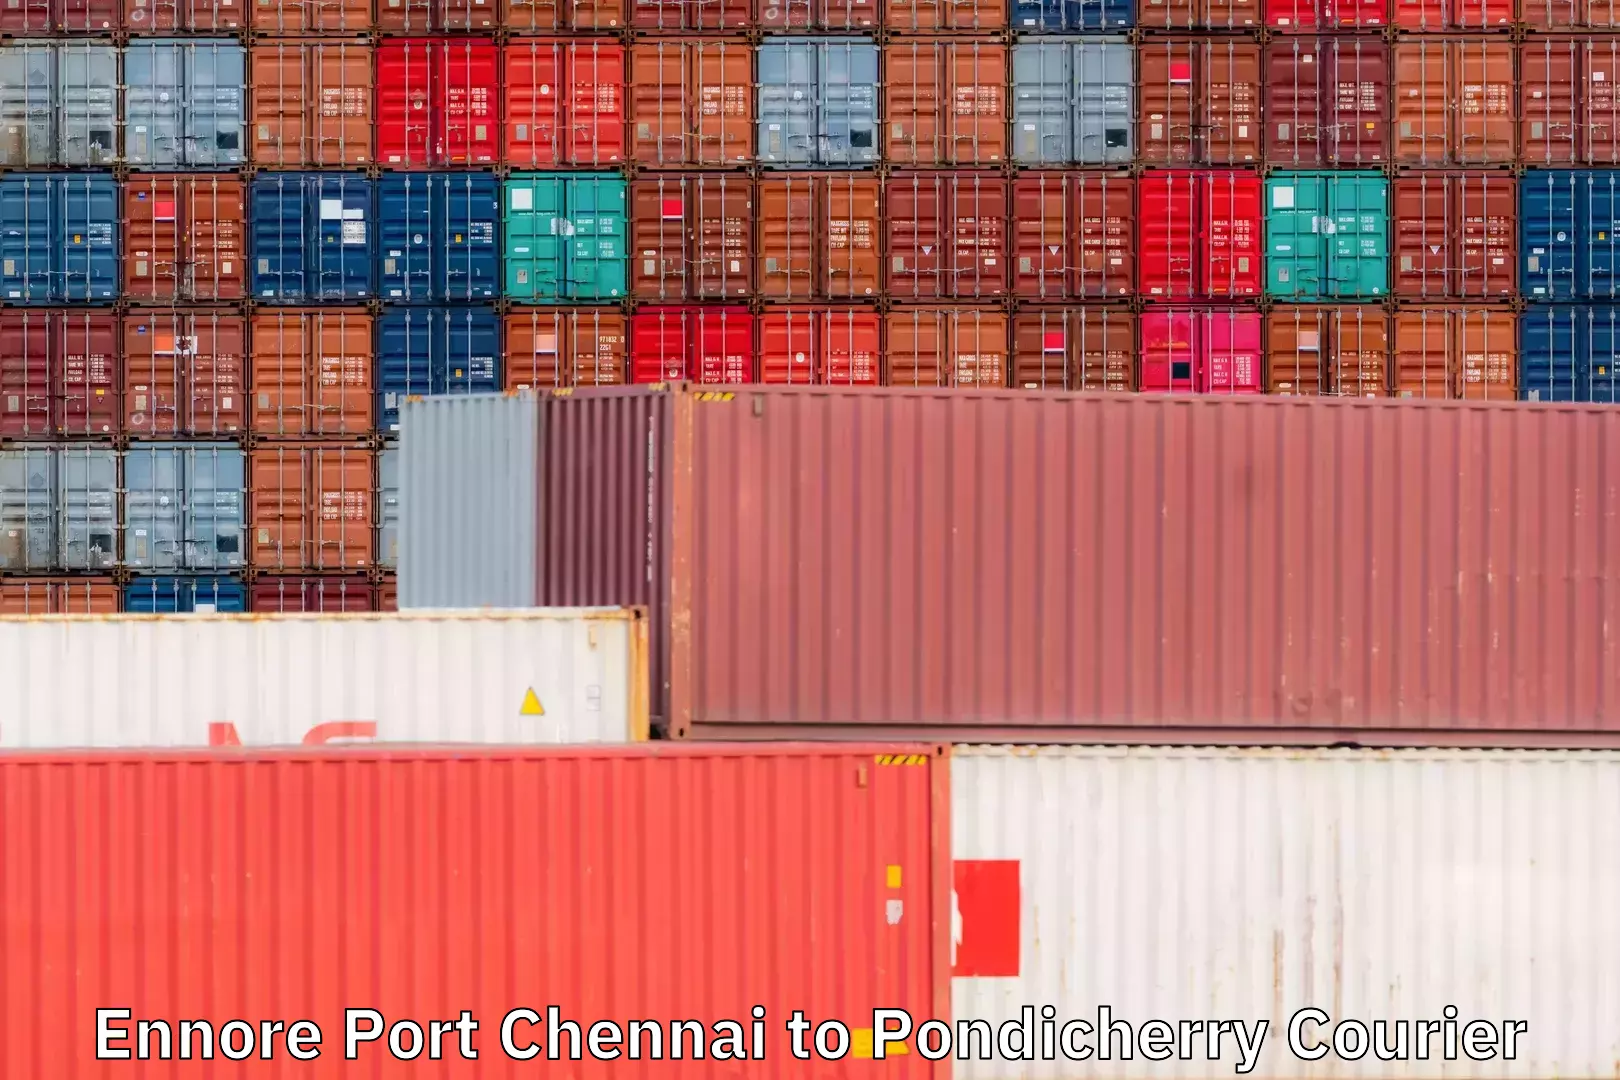 Express mail solutions Ennore Port Chennai to Pondicherry